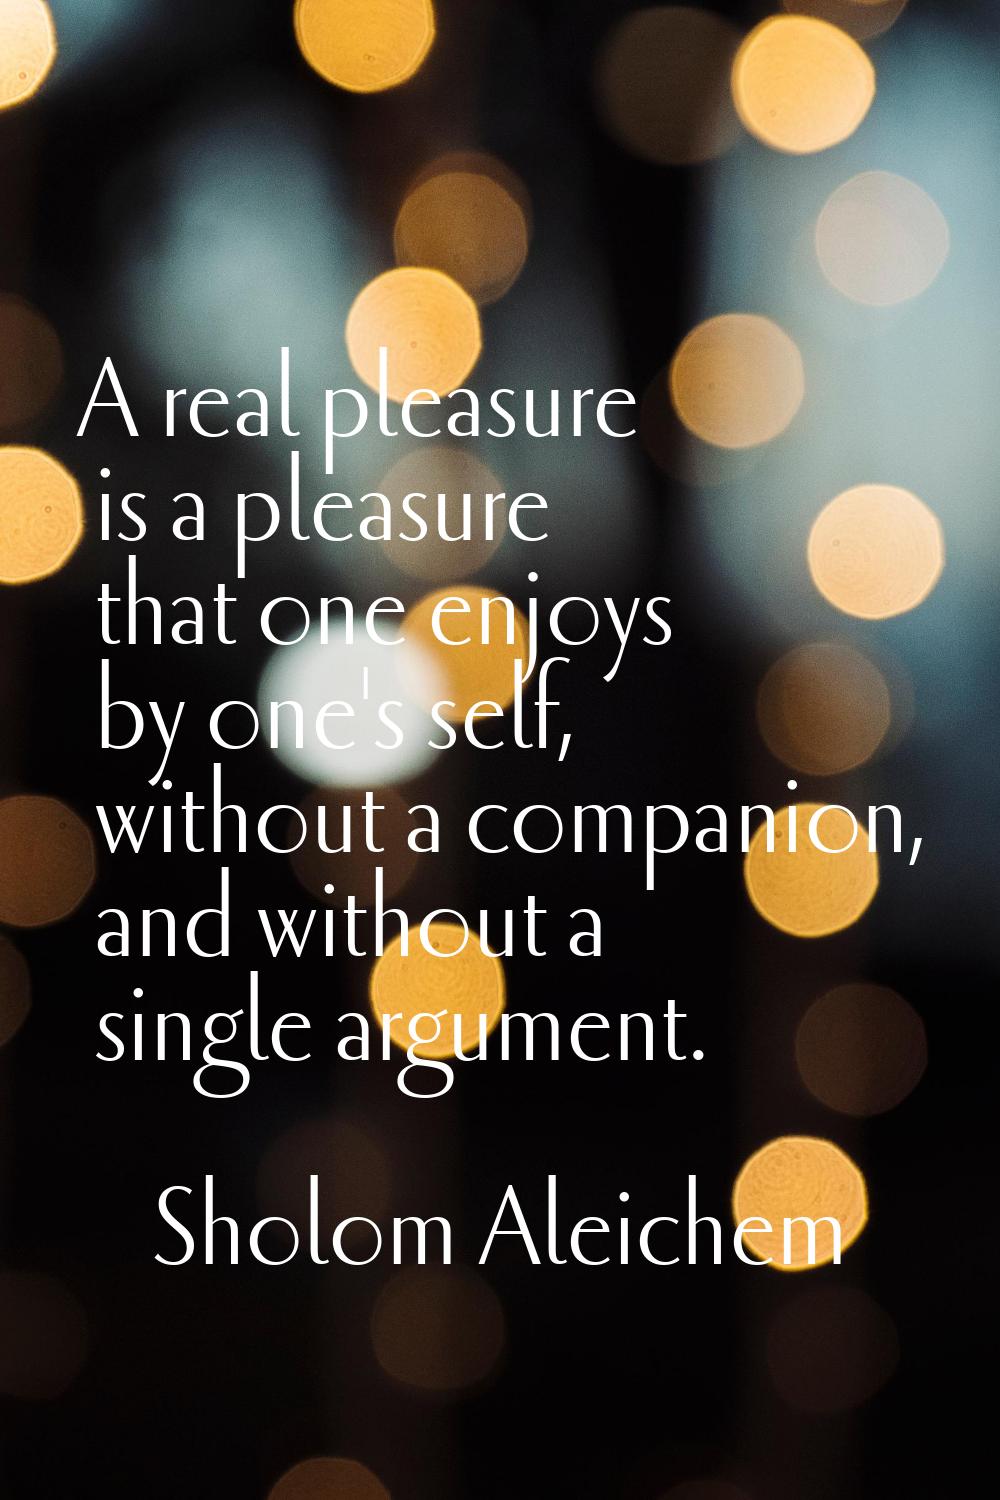 A real pleasure is a pleasure that one enjoys by one's self, without a companion, and without a sin